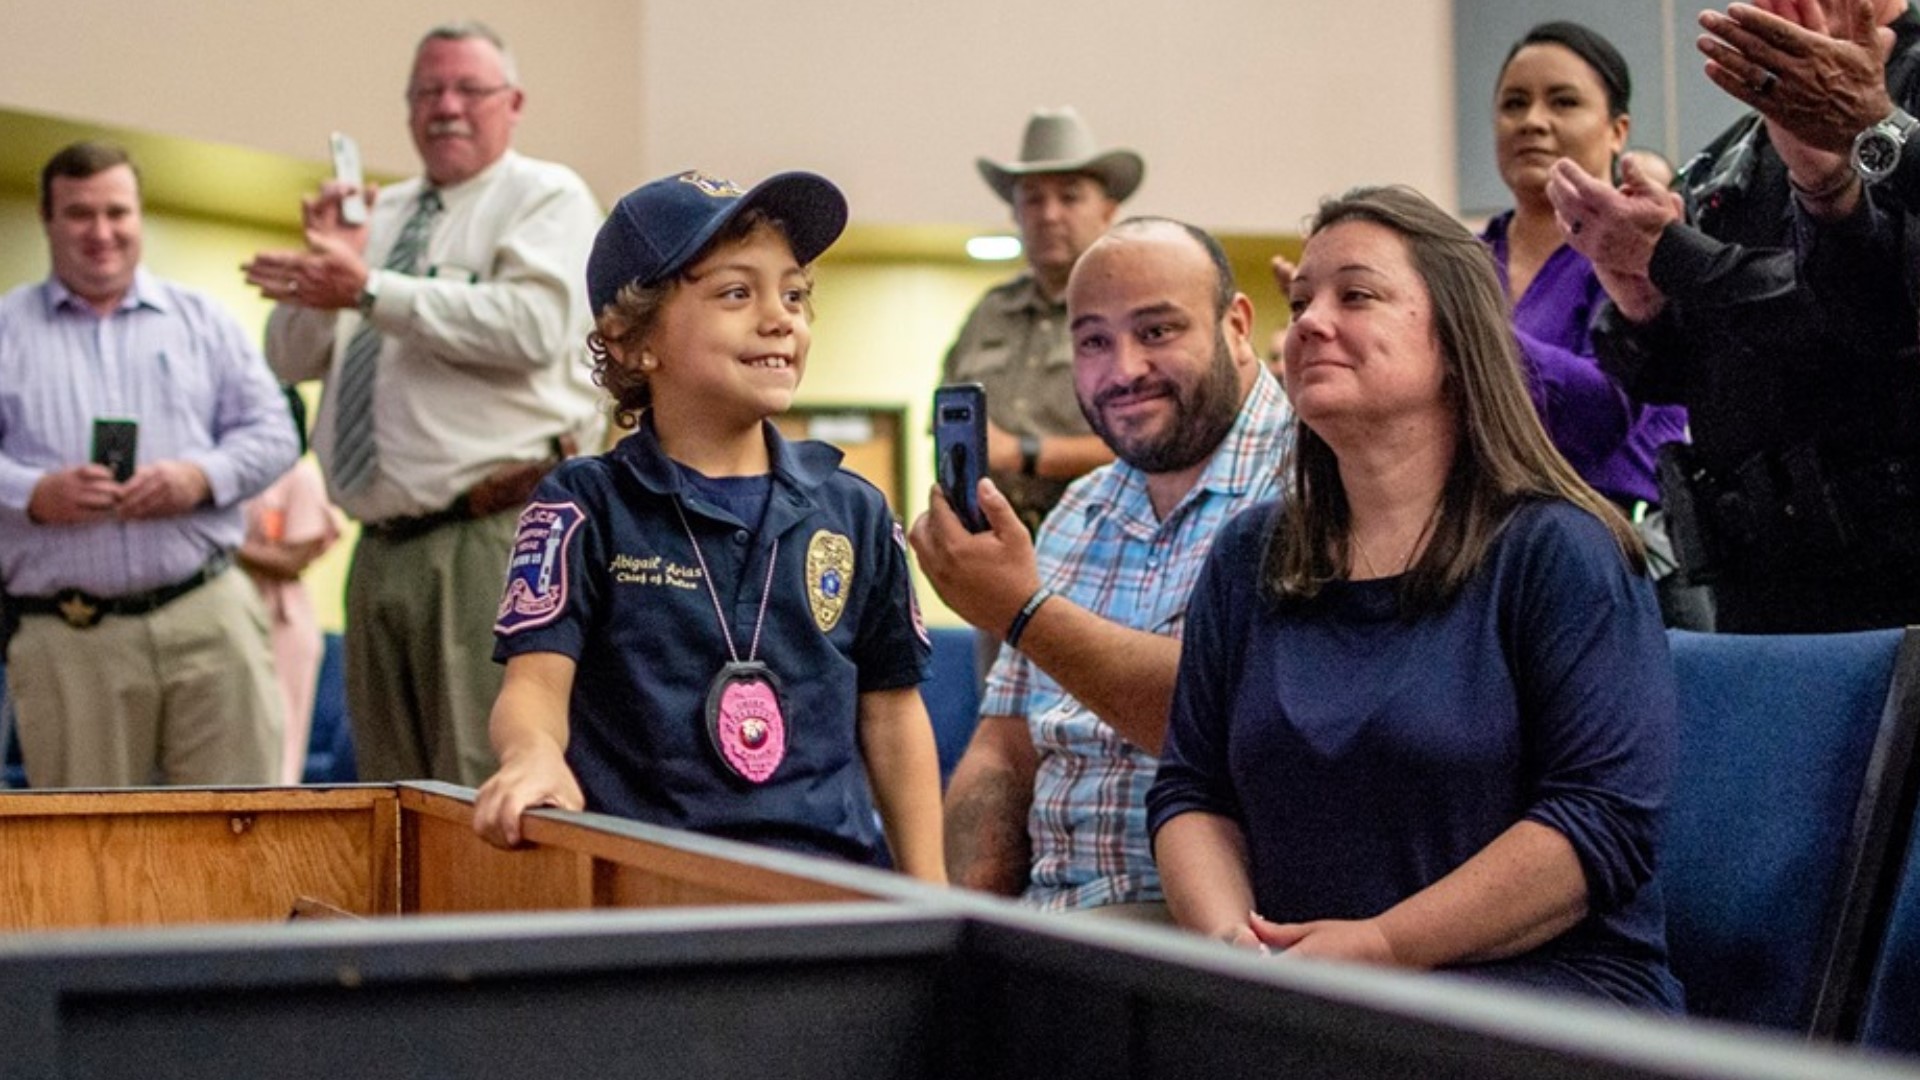 The six year old fighting terminal lung cancer has been sworn in as an honorary peace officer in departments across the nation.